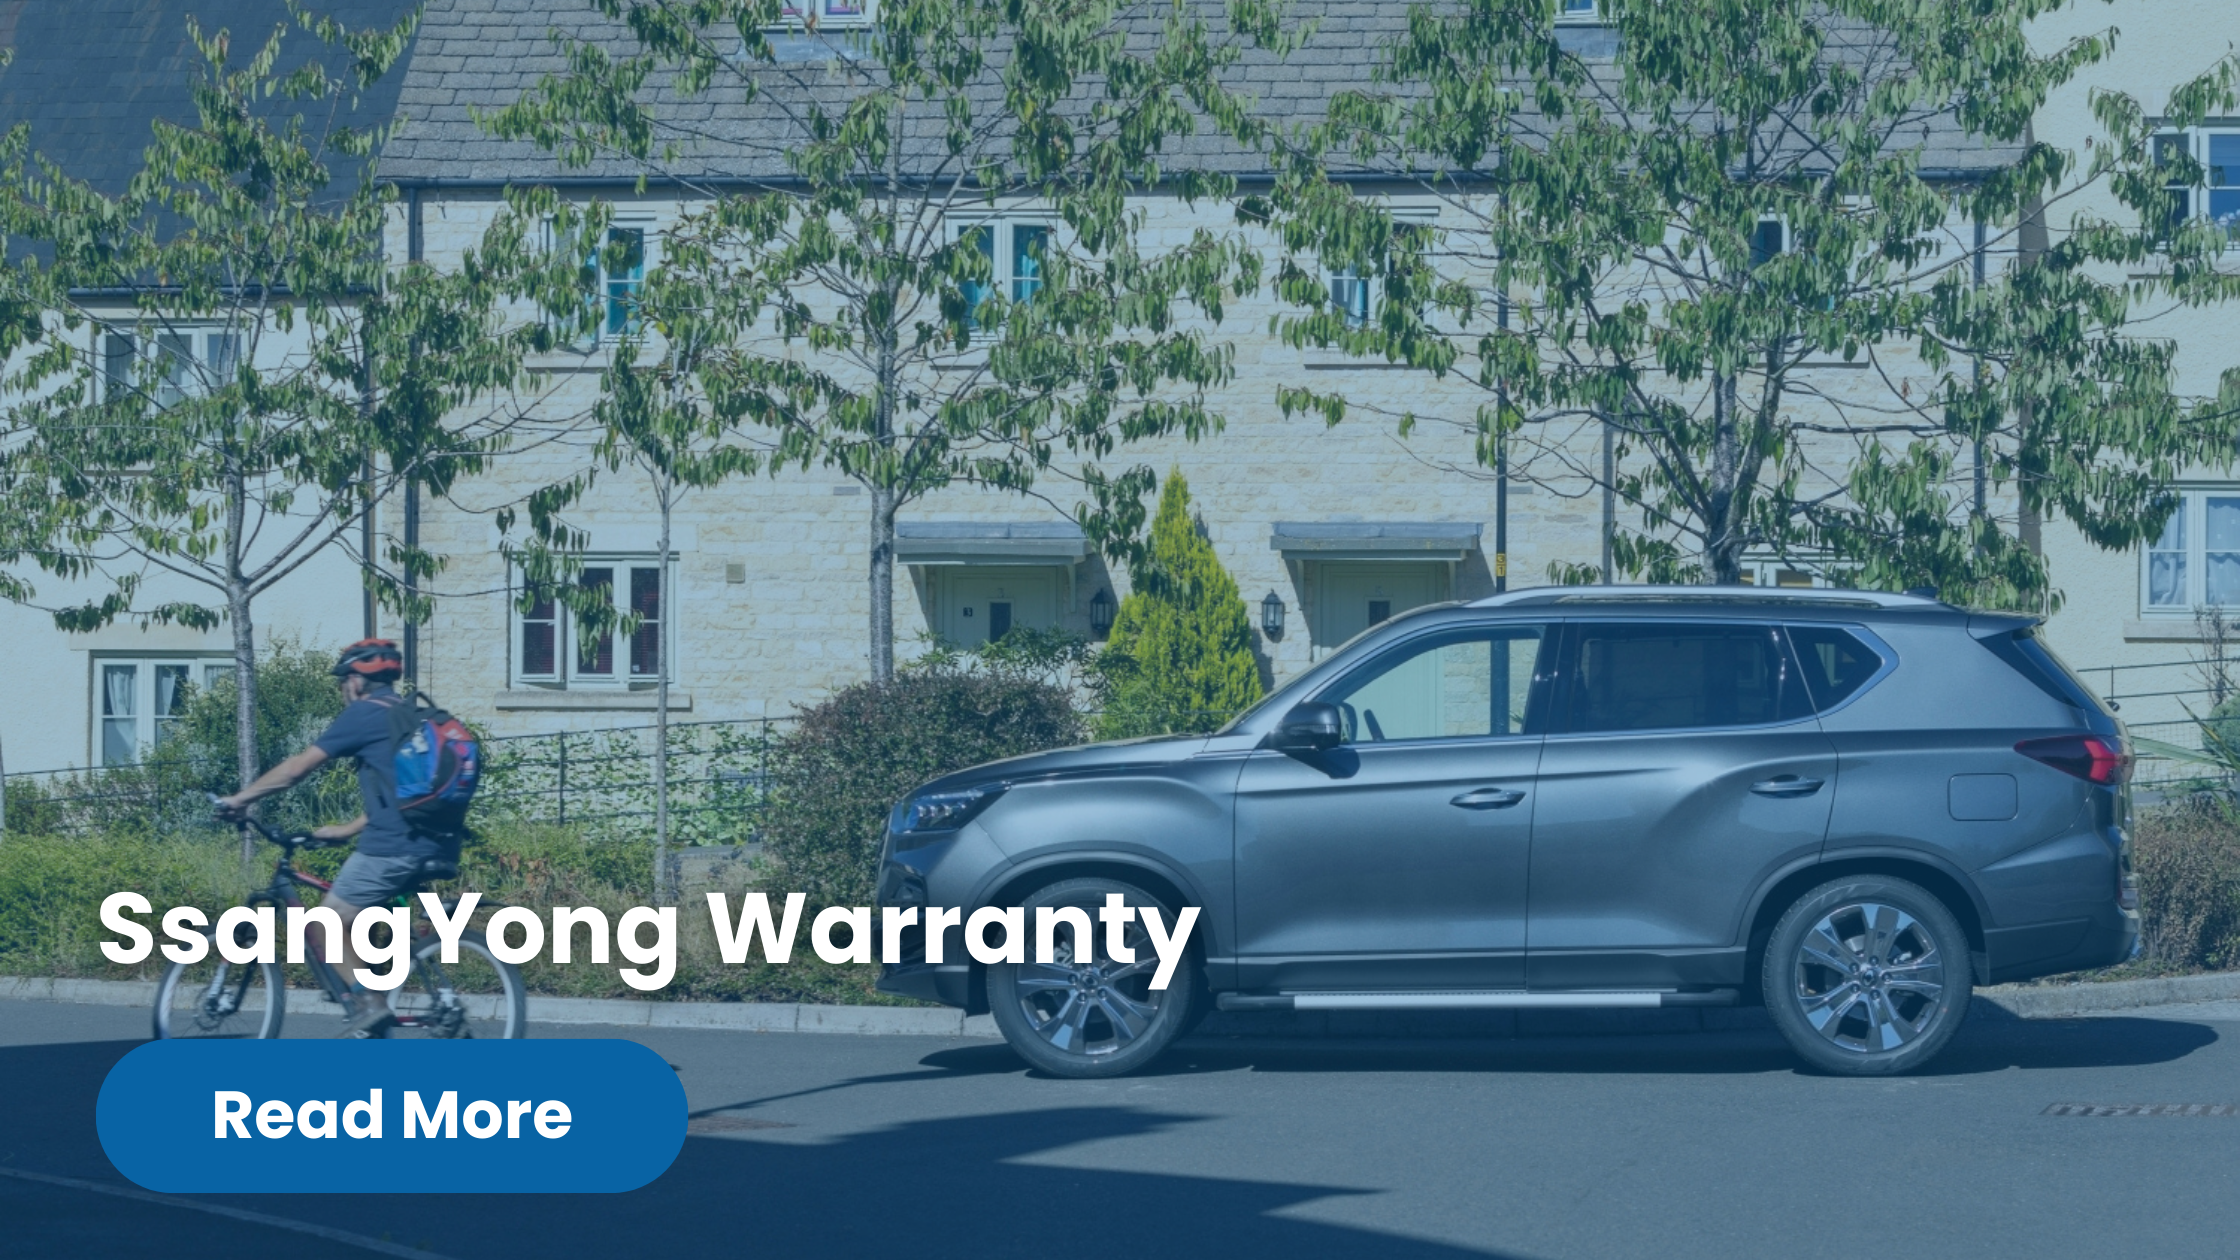 SsangYong 5 Year Warranty